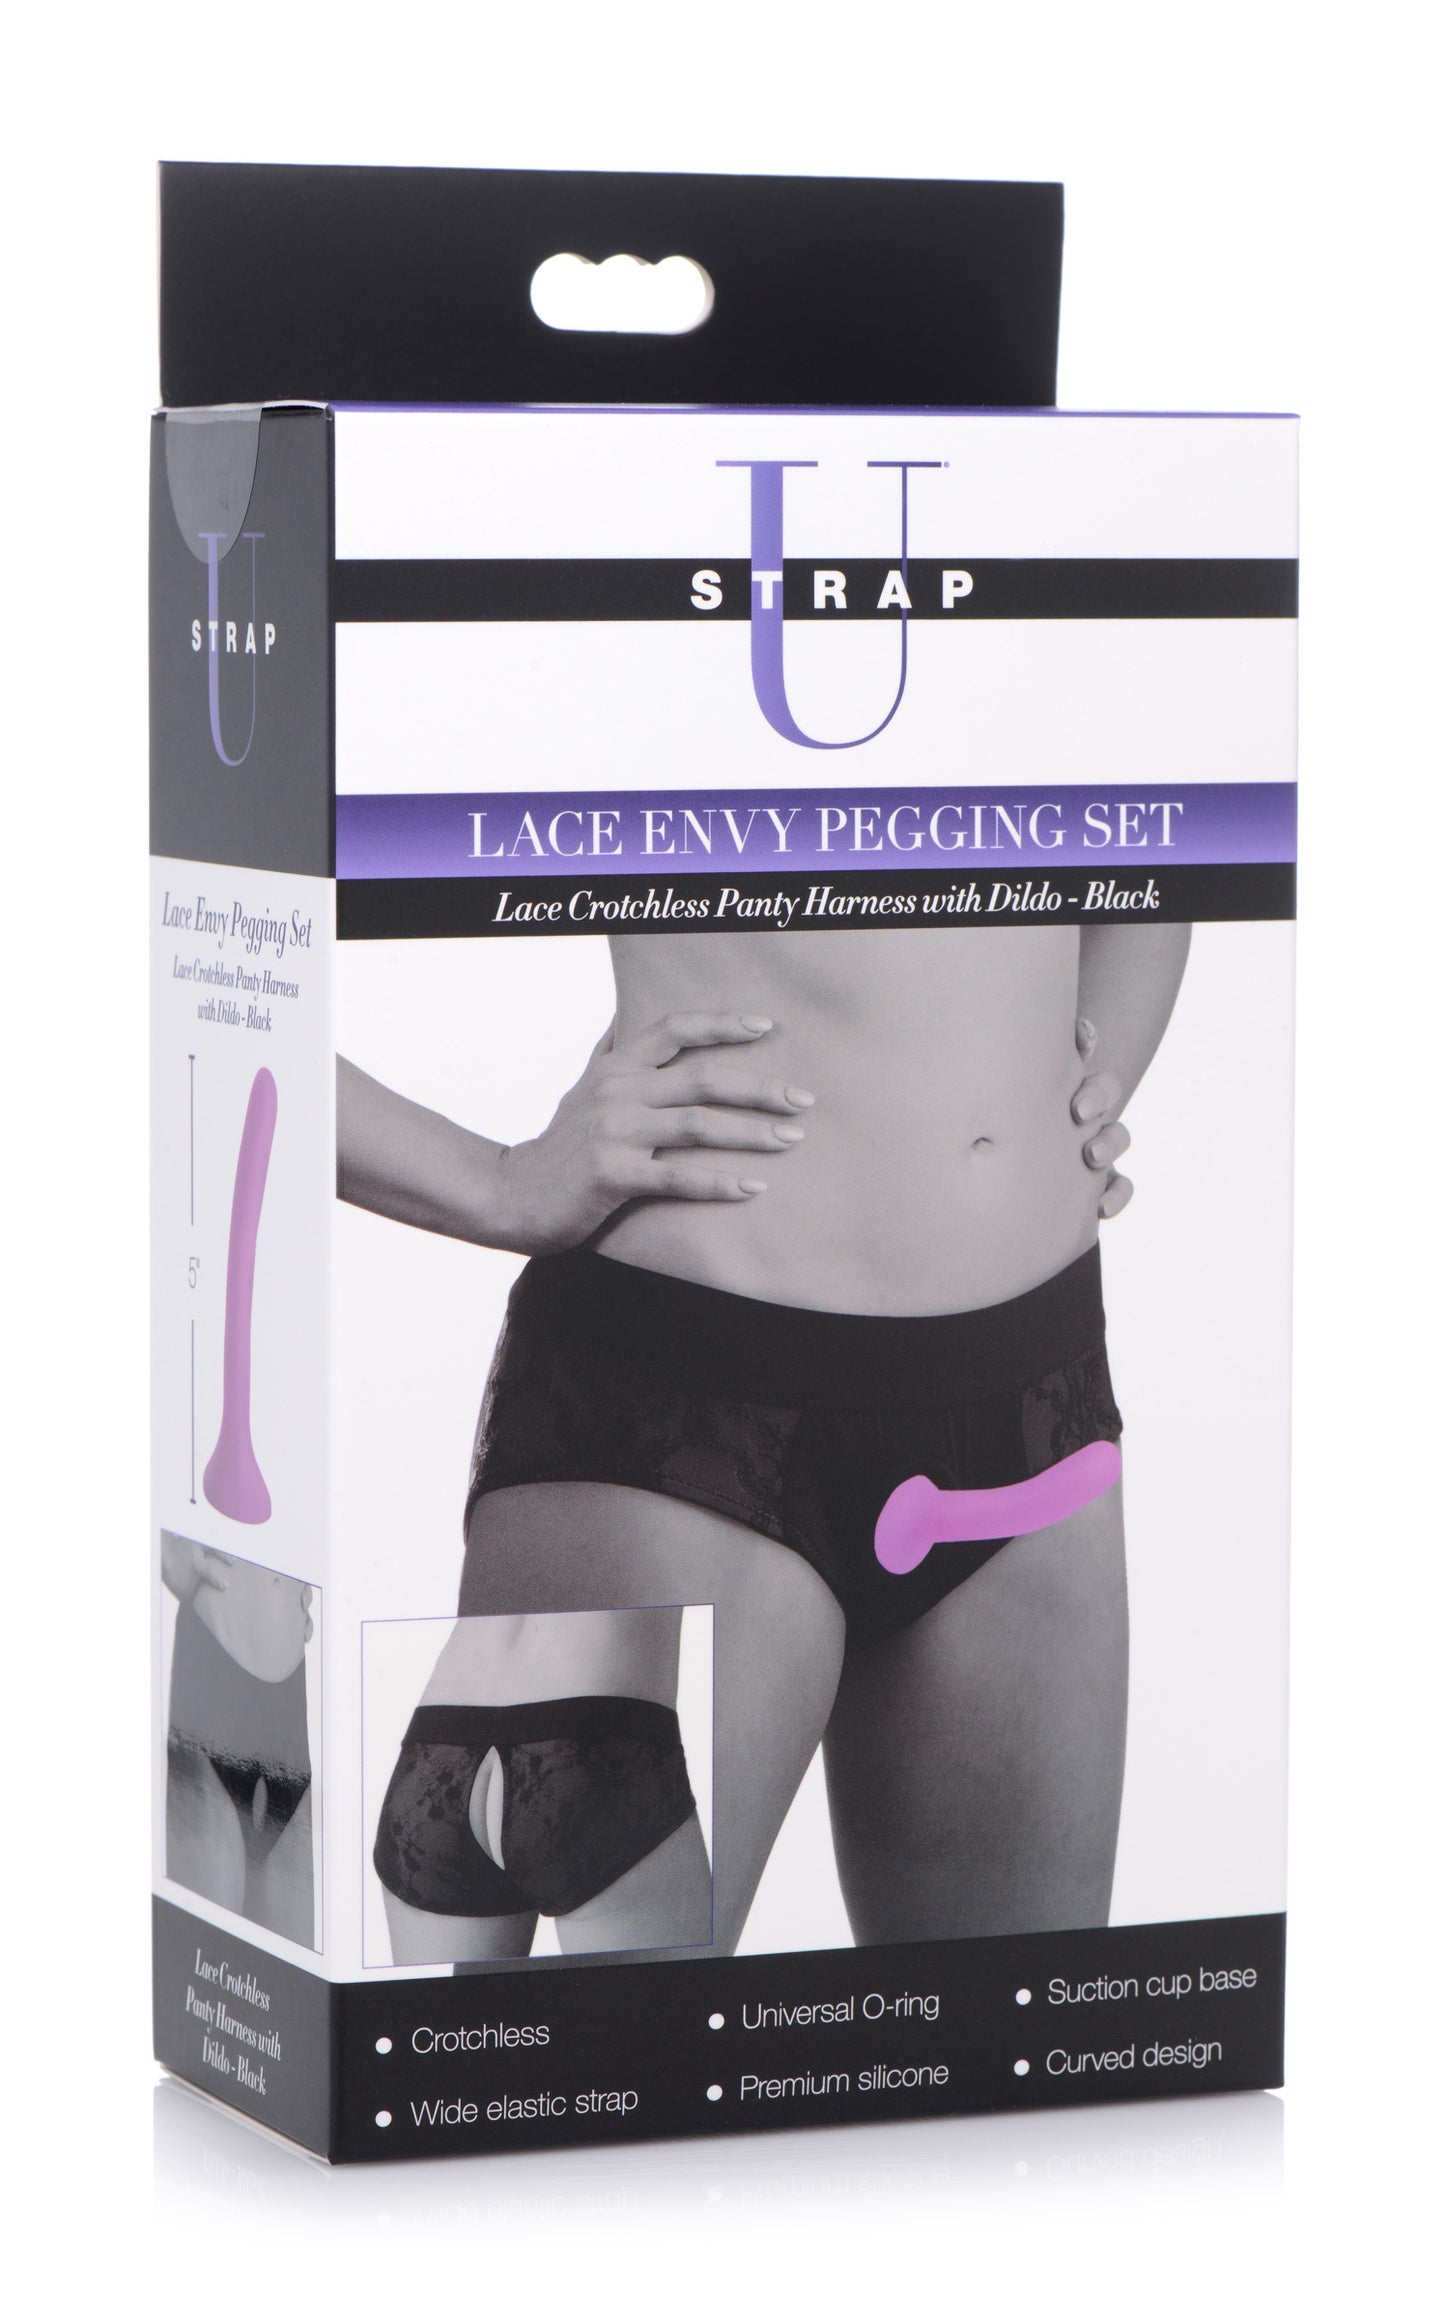 Lace Envy Black Pegging Set with Lace Crotchless Panty Harness and Dildo - L-XL - UABDSM